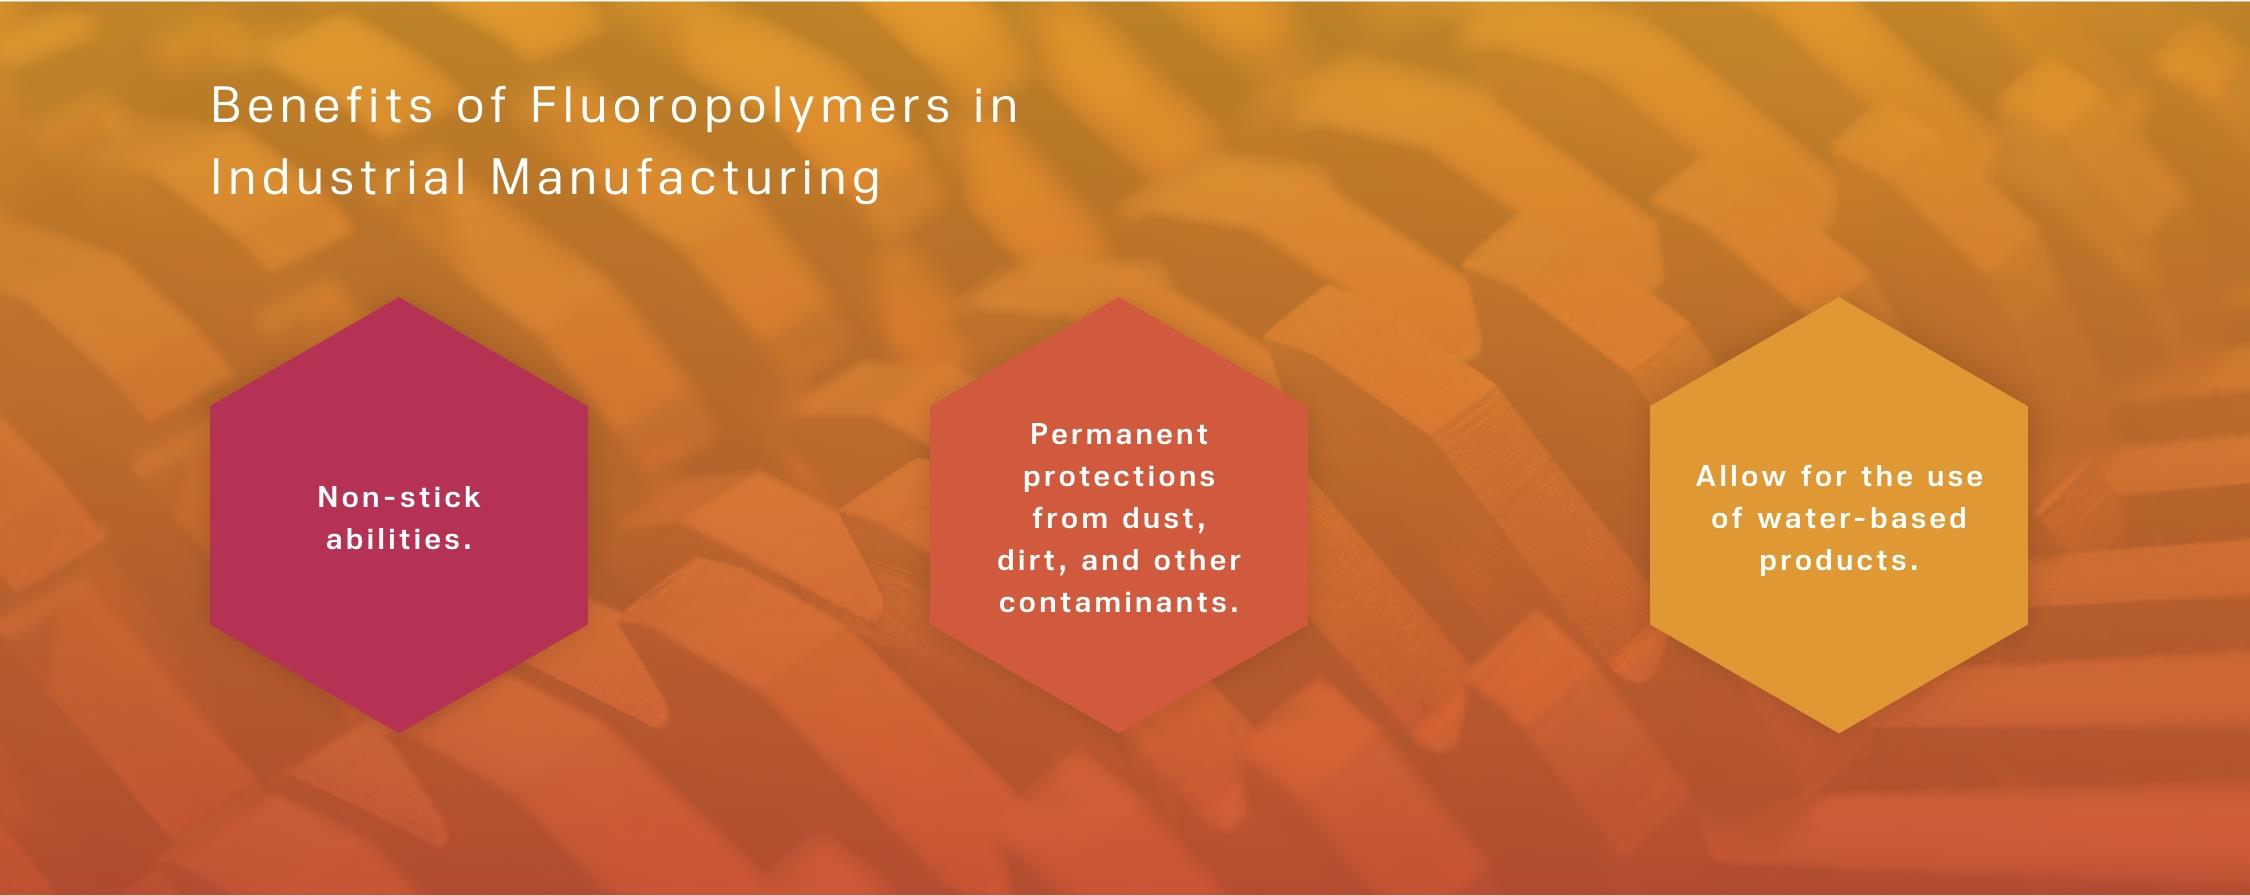 Benefits of Fluoropolymers in Industrial Manufacturing